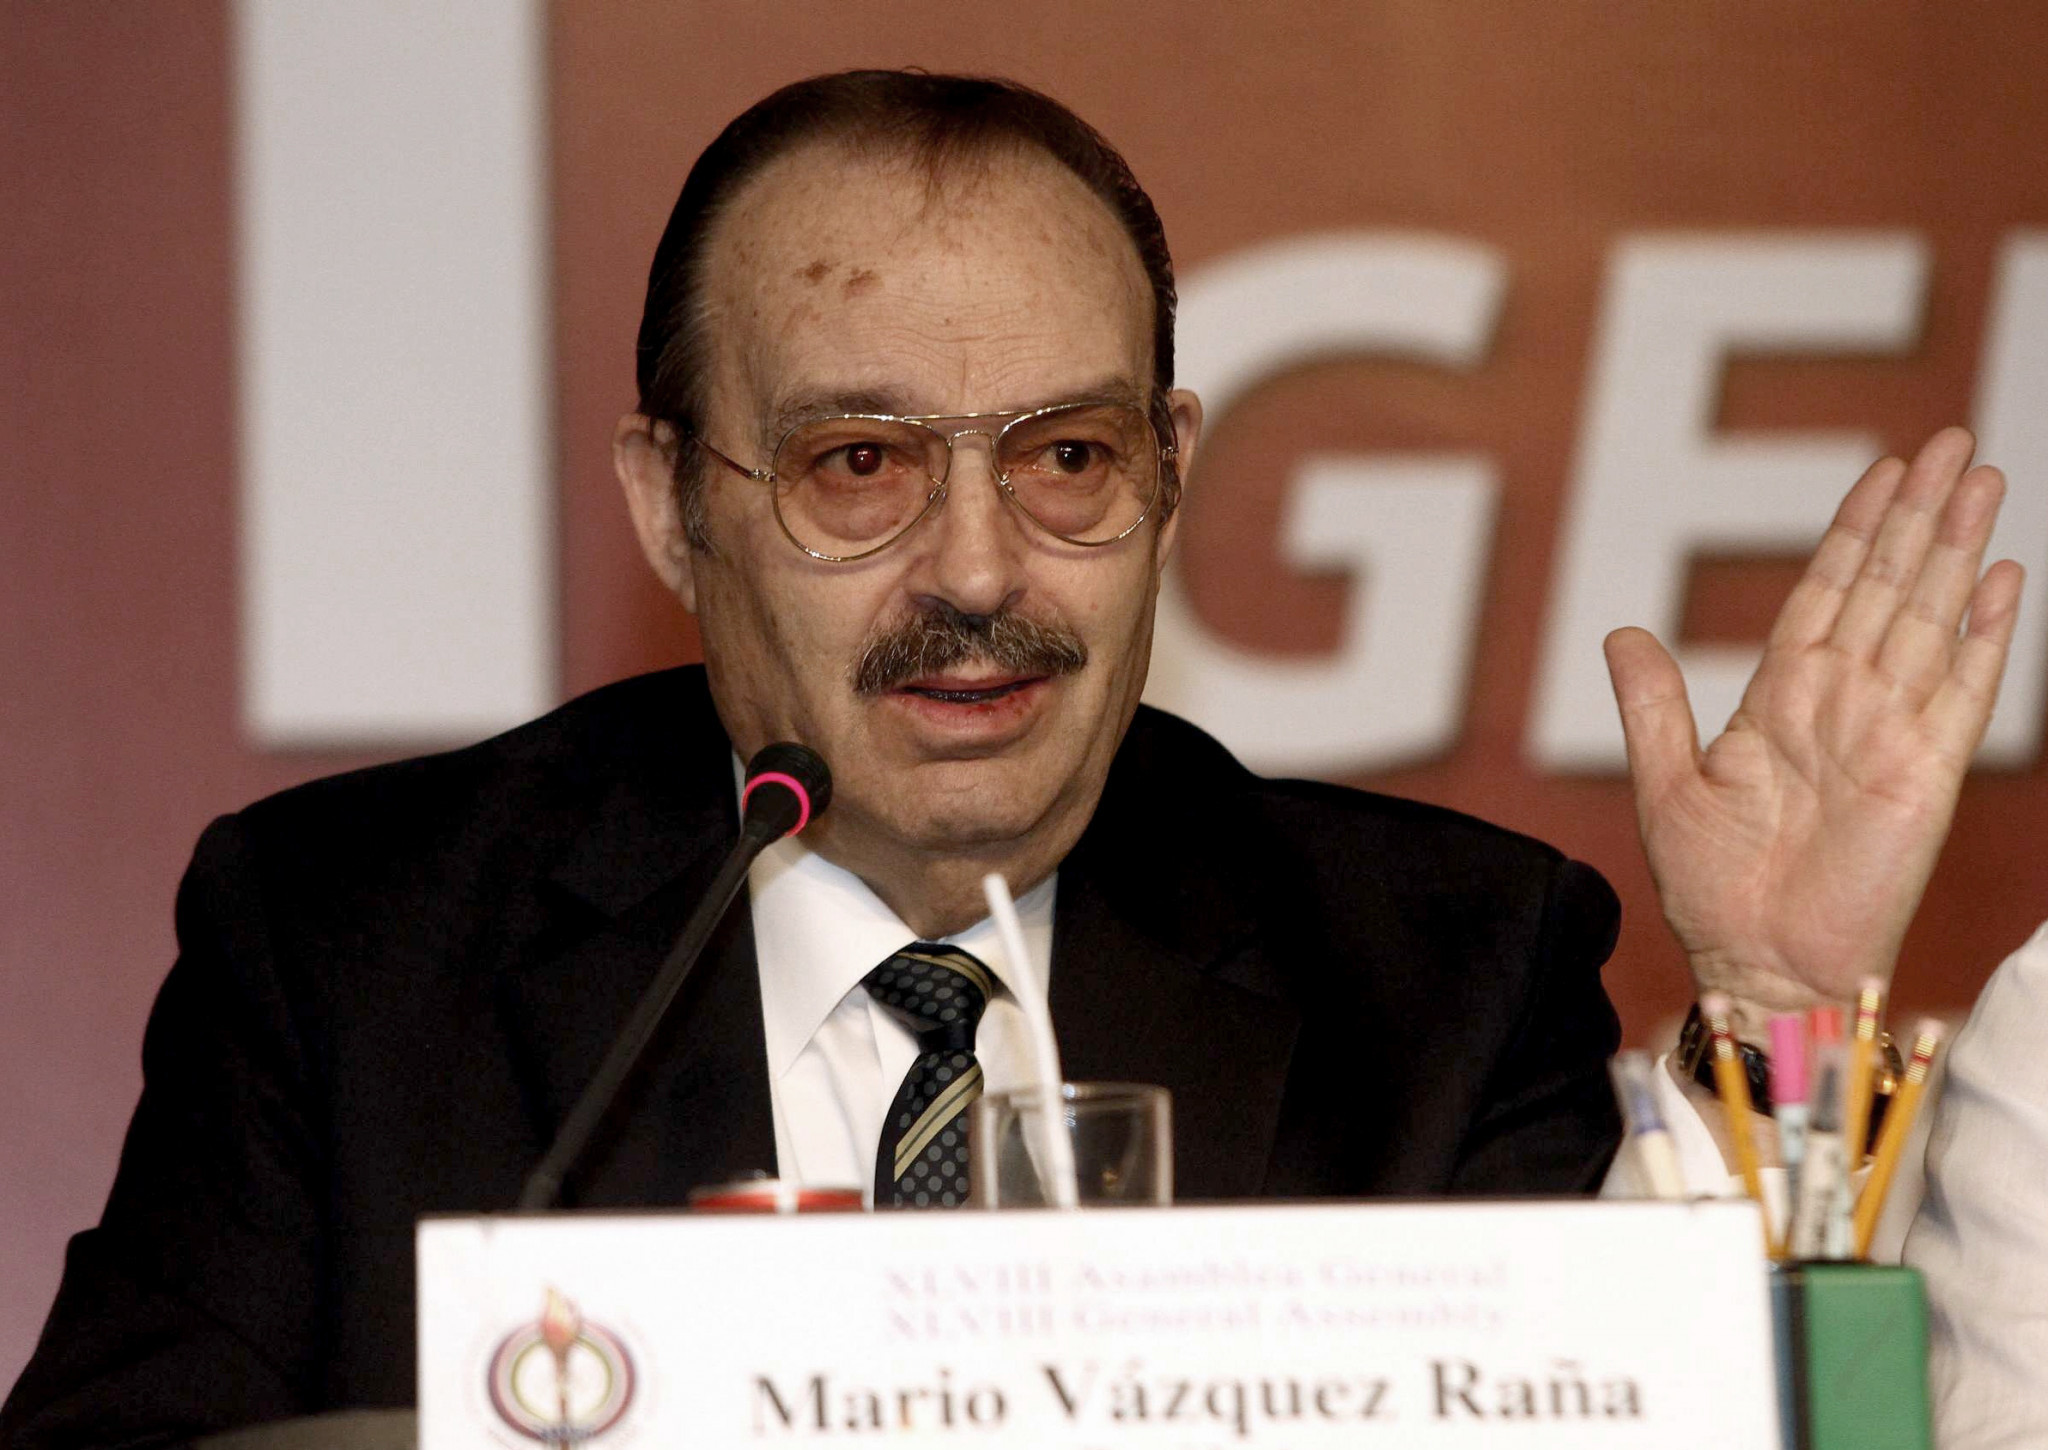 Sports administration runs in the family as the late Mario VÃ¡zquez RaÃ±a headed up ANOC for 30 years Â©Getty Images